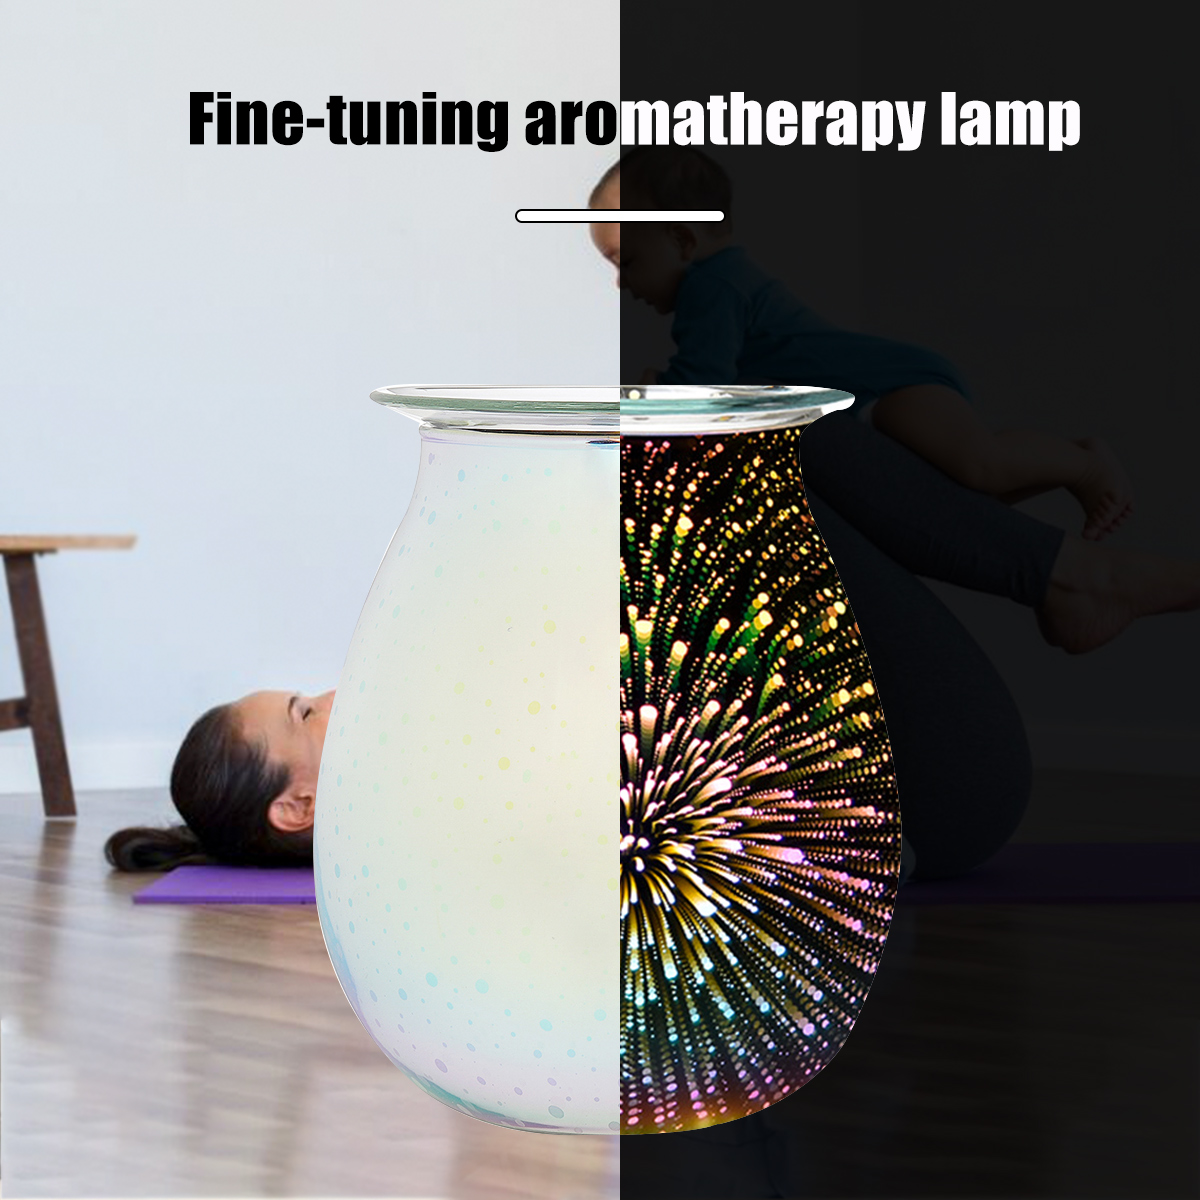 3D-Glass-Electric-Aromatherapy-Lamp-Fine-tuning-Home-Aromatherapy-Machine-1791721-4